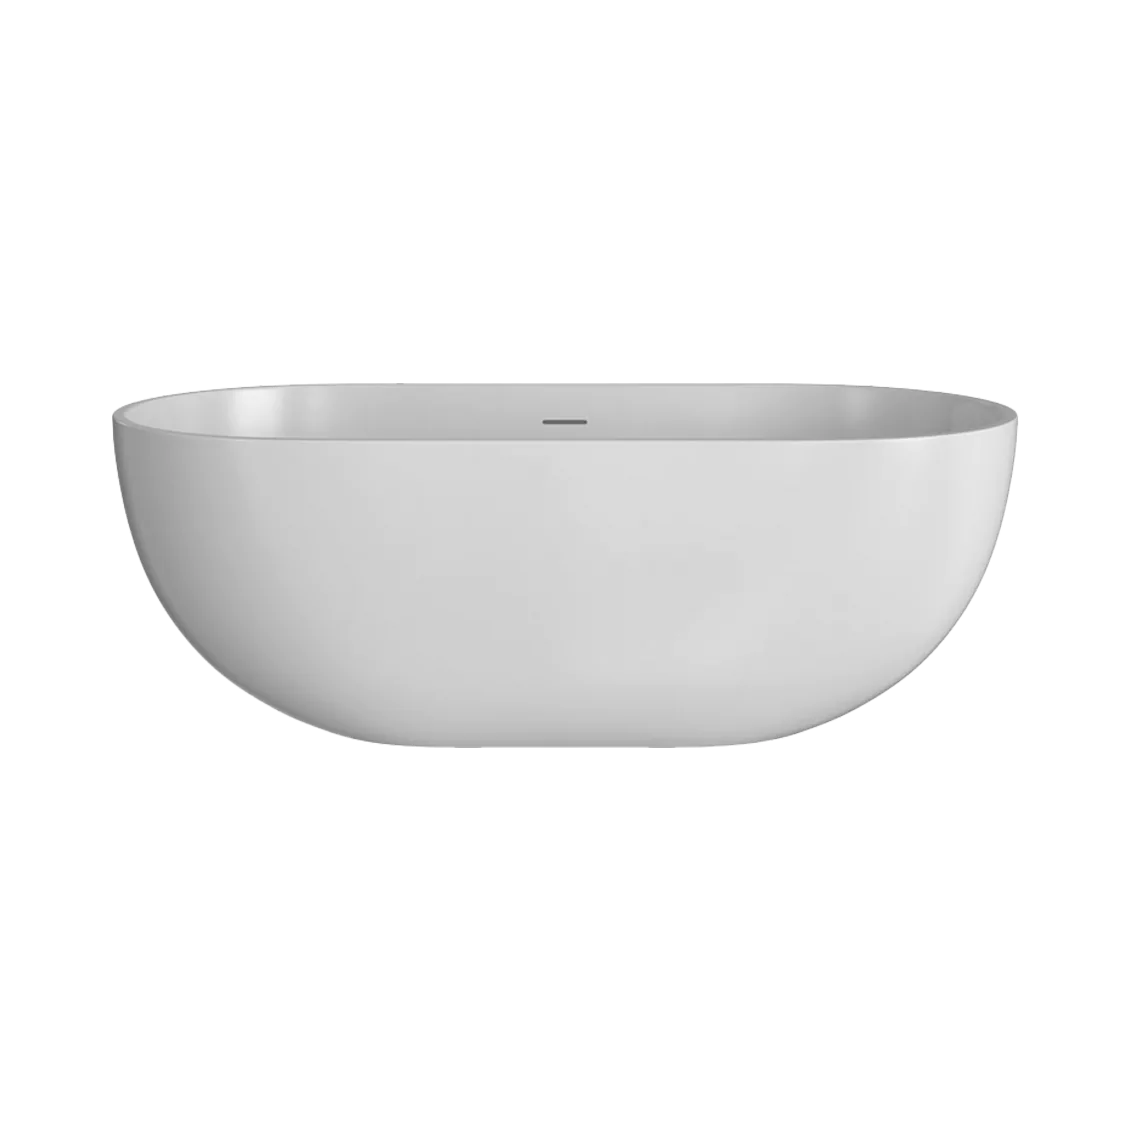 Tissino Tanaro Freestanding Bath with or without Ledge Gloss White Finish size 1680mm x 780mm